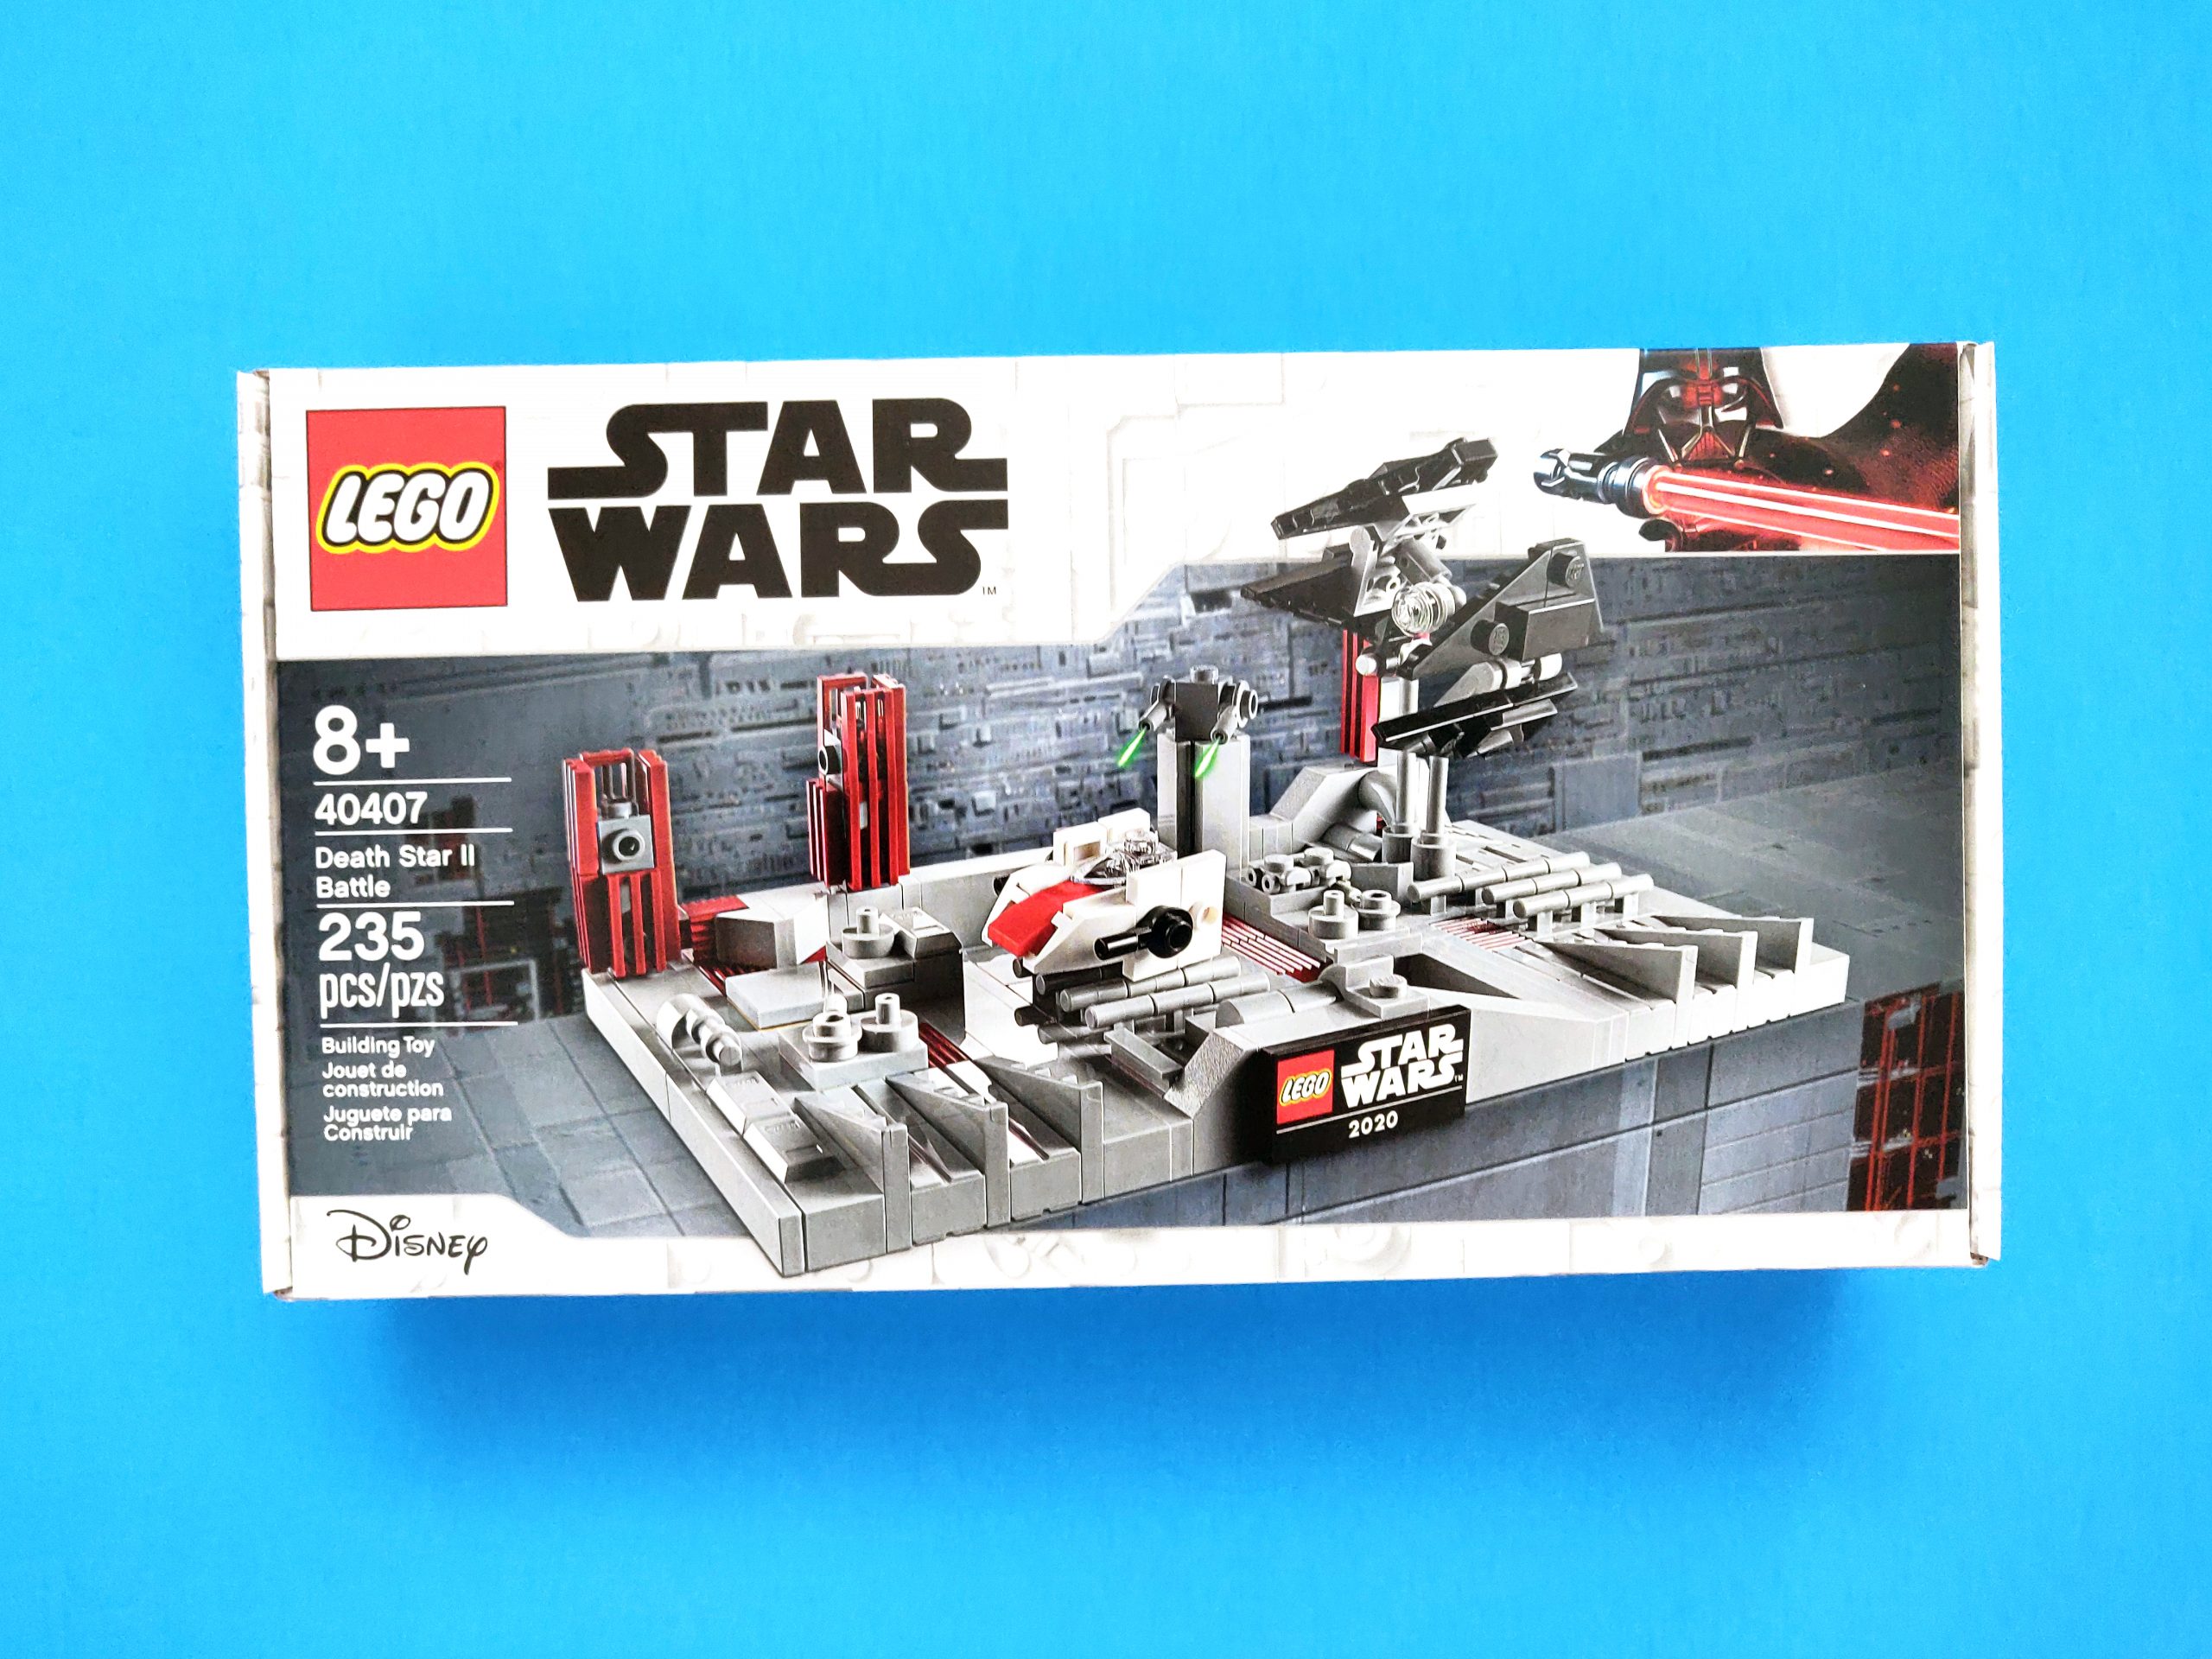 How many pieces does the lego death star 2 have Lego Star Wars Death Star Ii Battle 40407 Review The Brick Fan